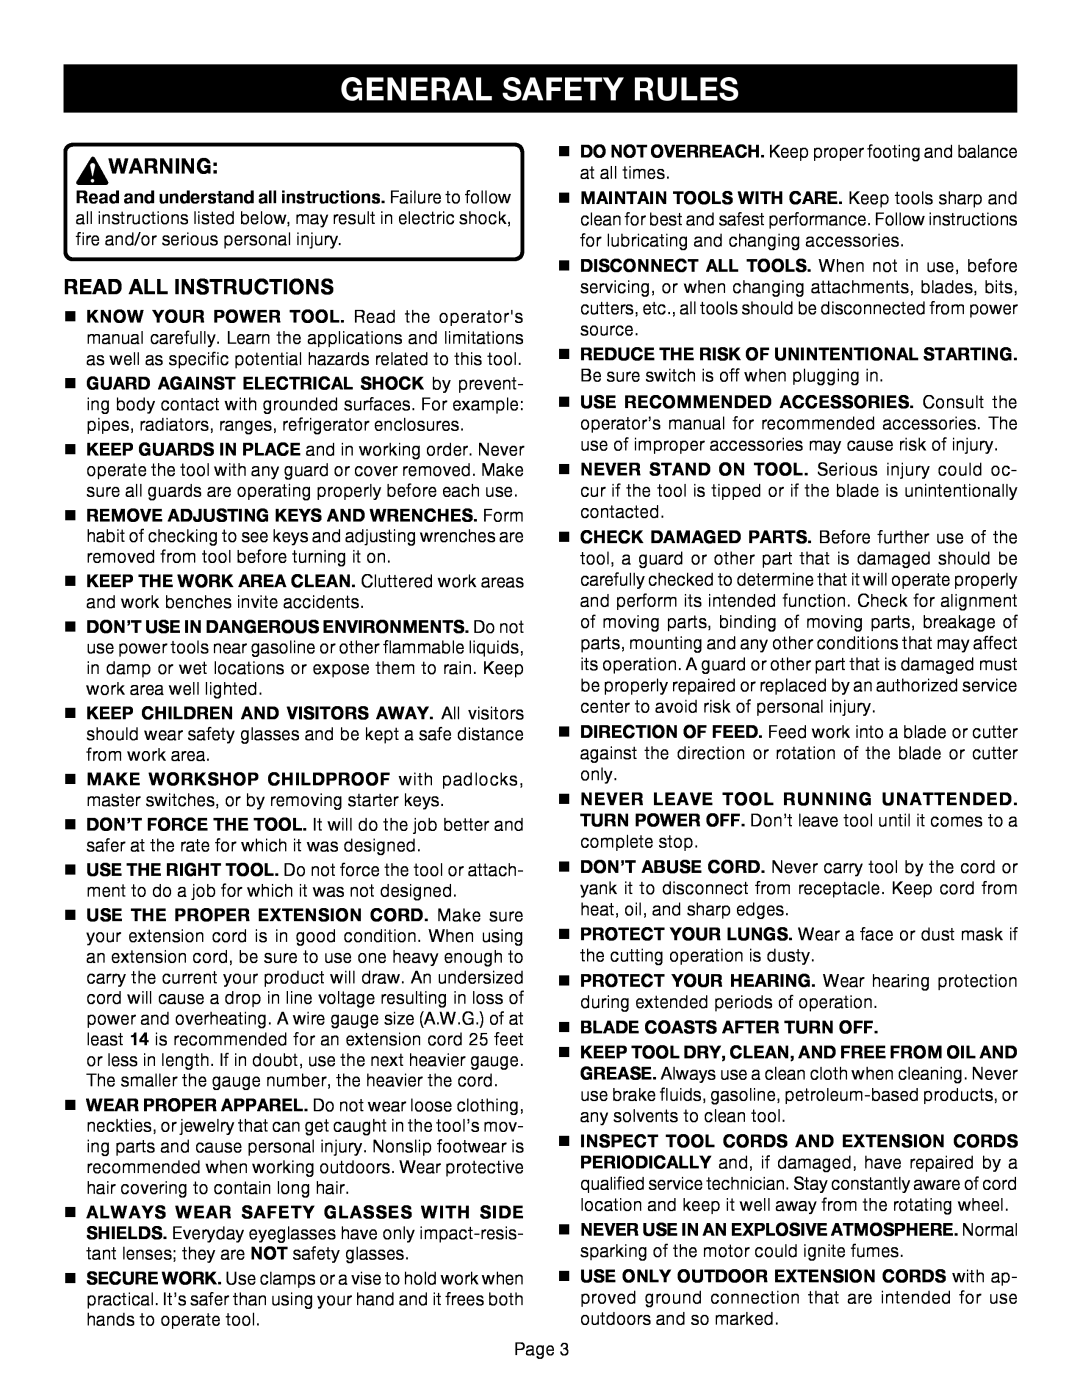 Ryobi BS1001SV manual General Safety Rules, Read All Instructions, n BLADE COASTS AFTER TURN OFF 